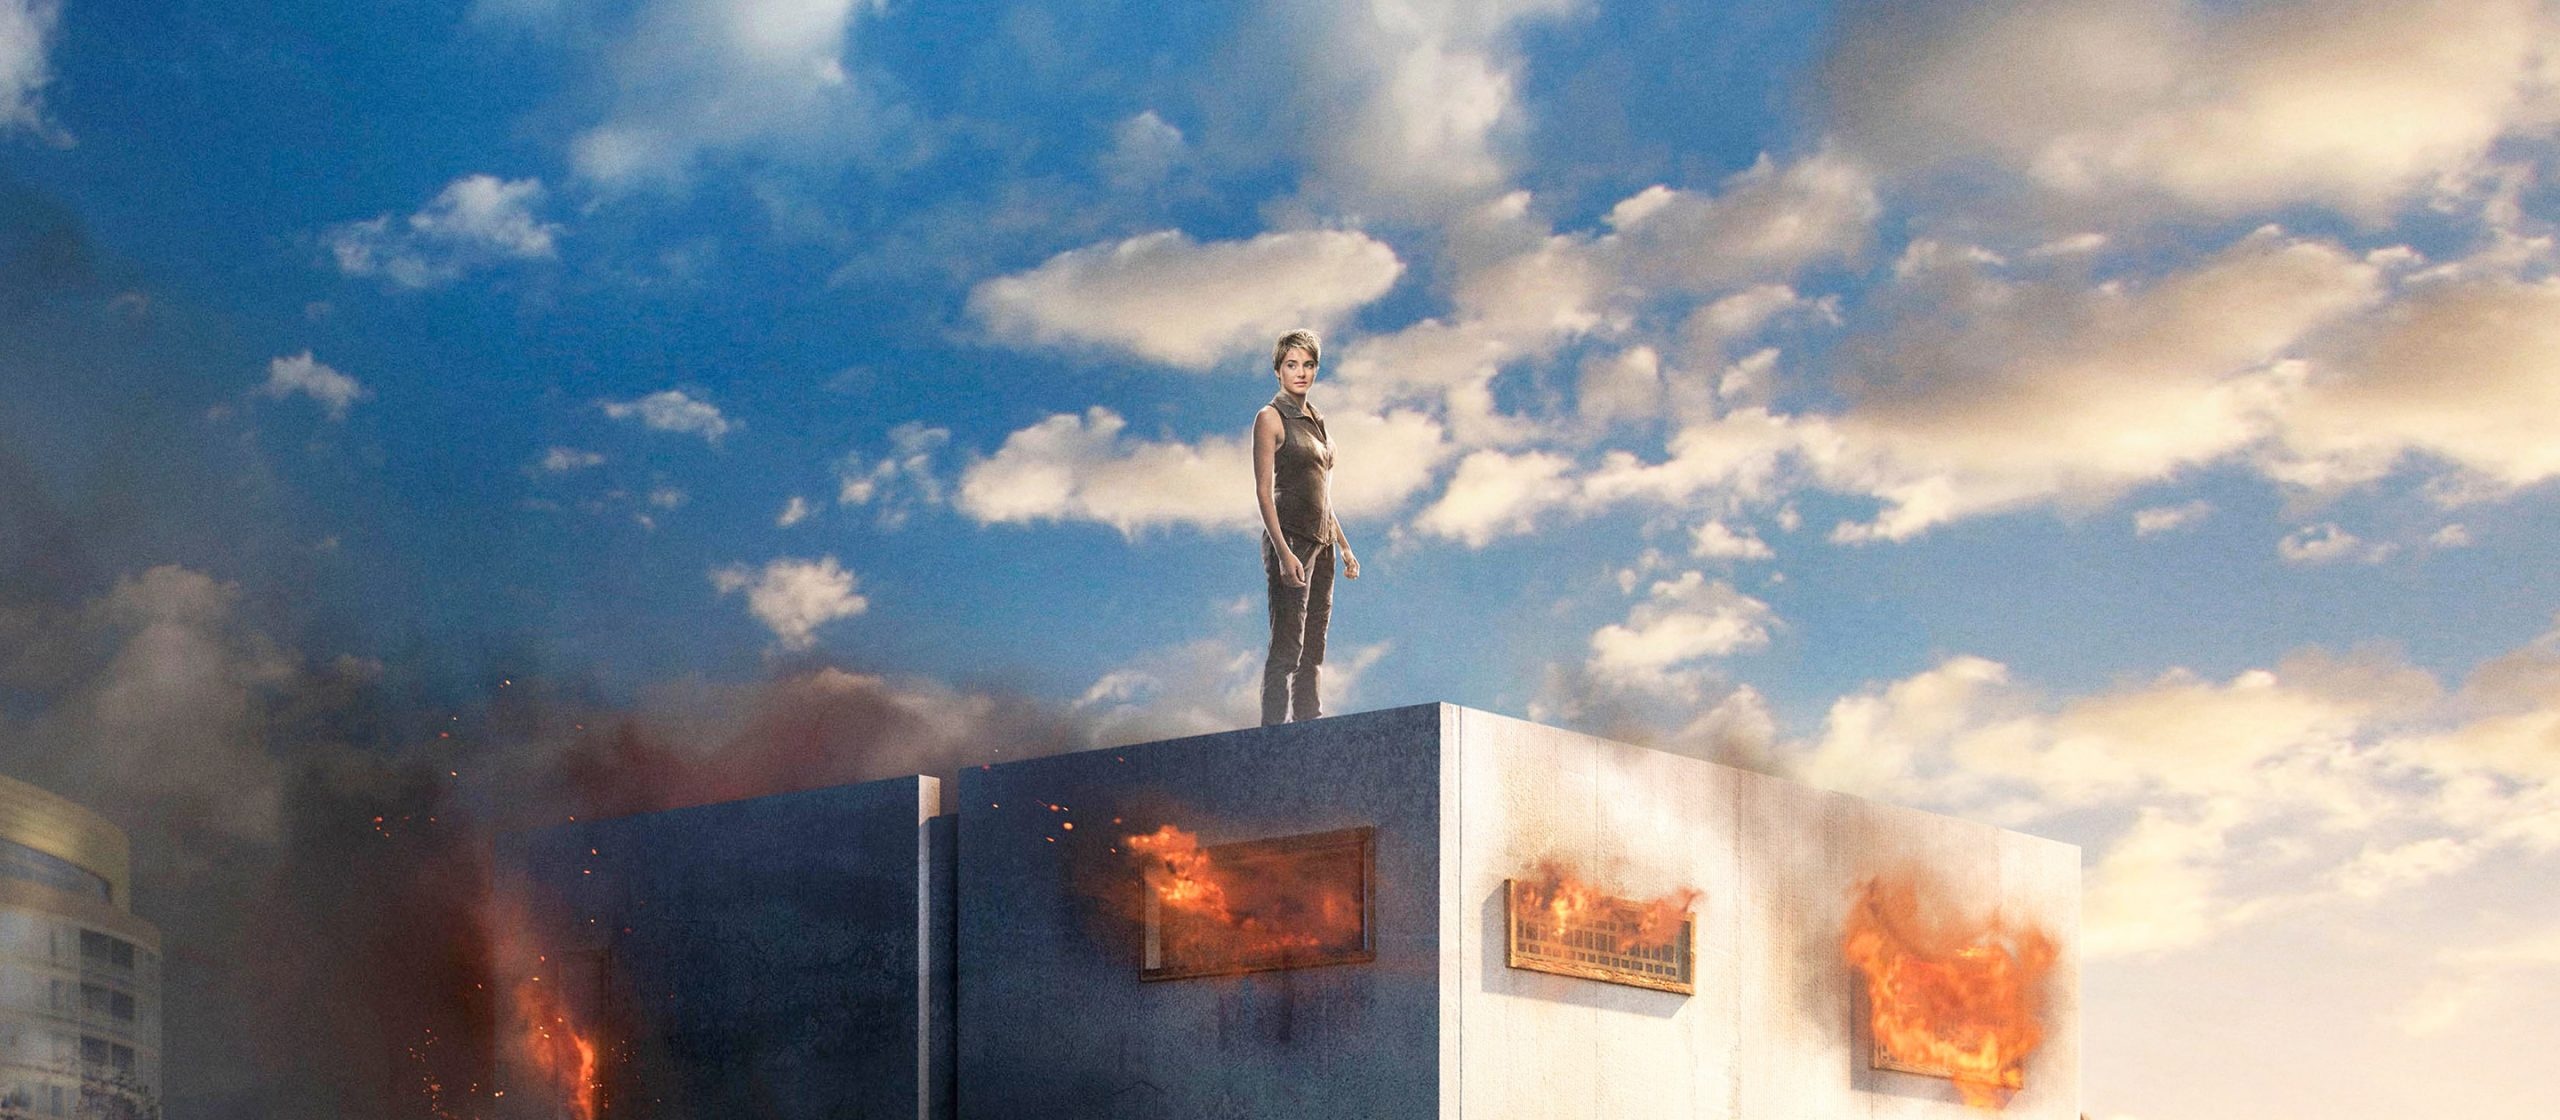 Insurgent movie, book to movie changes, movie spoilers, Bookstacked, 2560x1120 Dual Screen Desktop